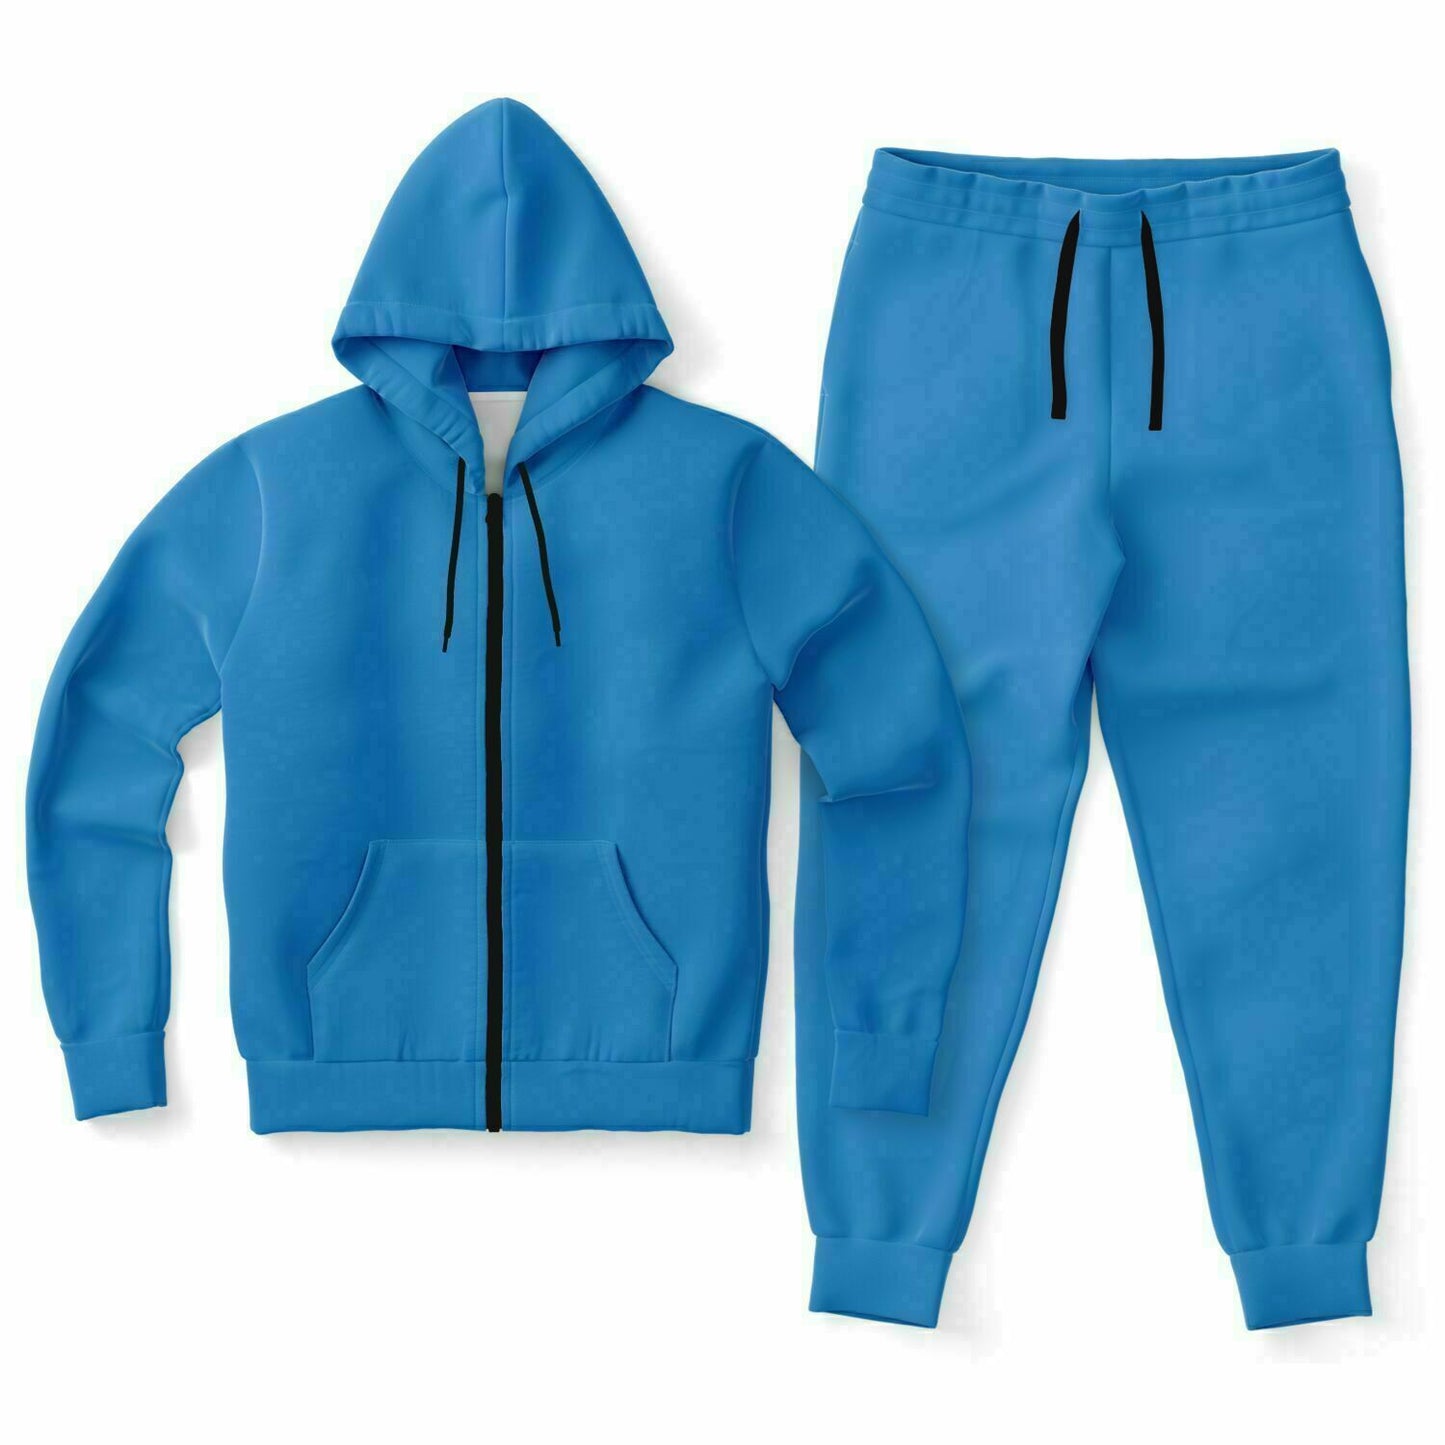 Nature Blue Zipper Hoodie and Jogger Set - XS / XS - Sport Finesse